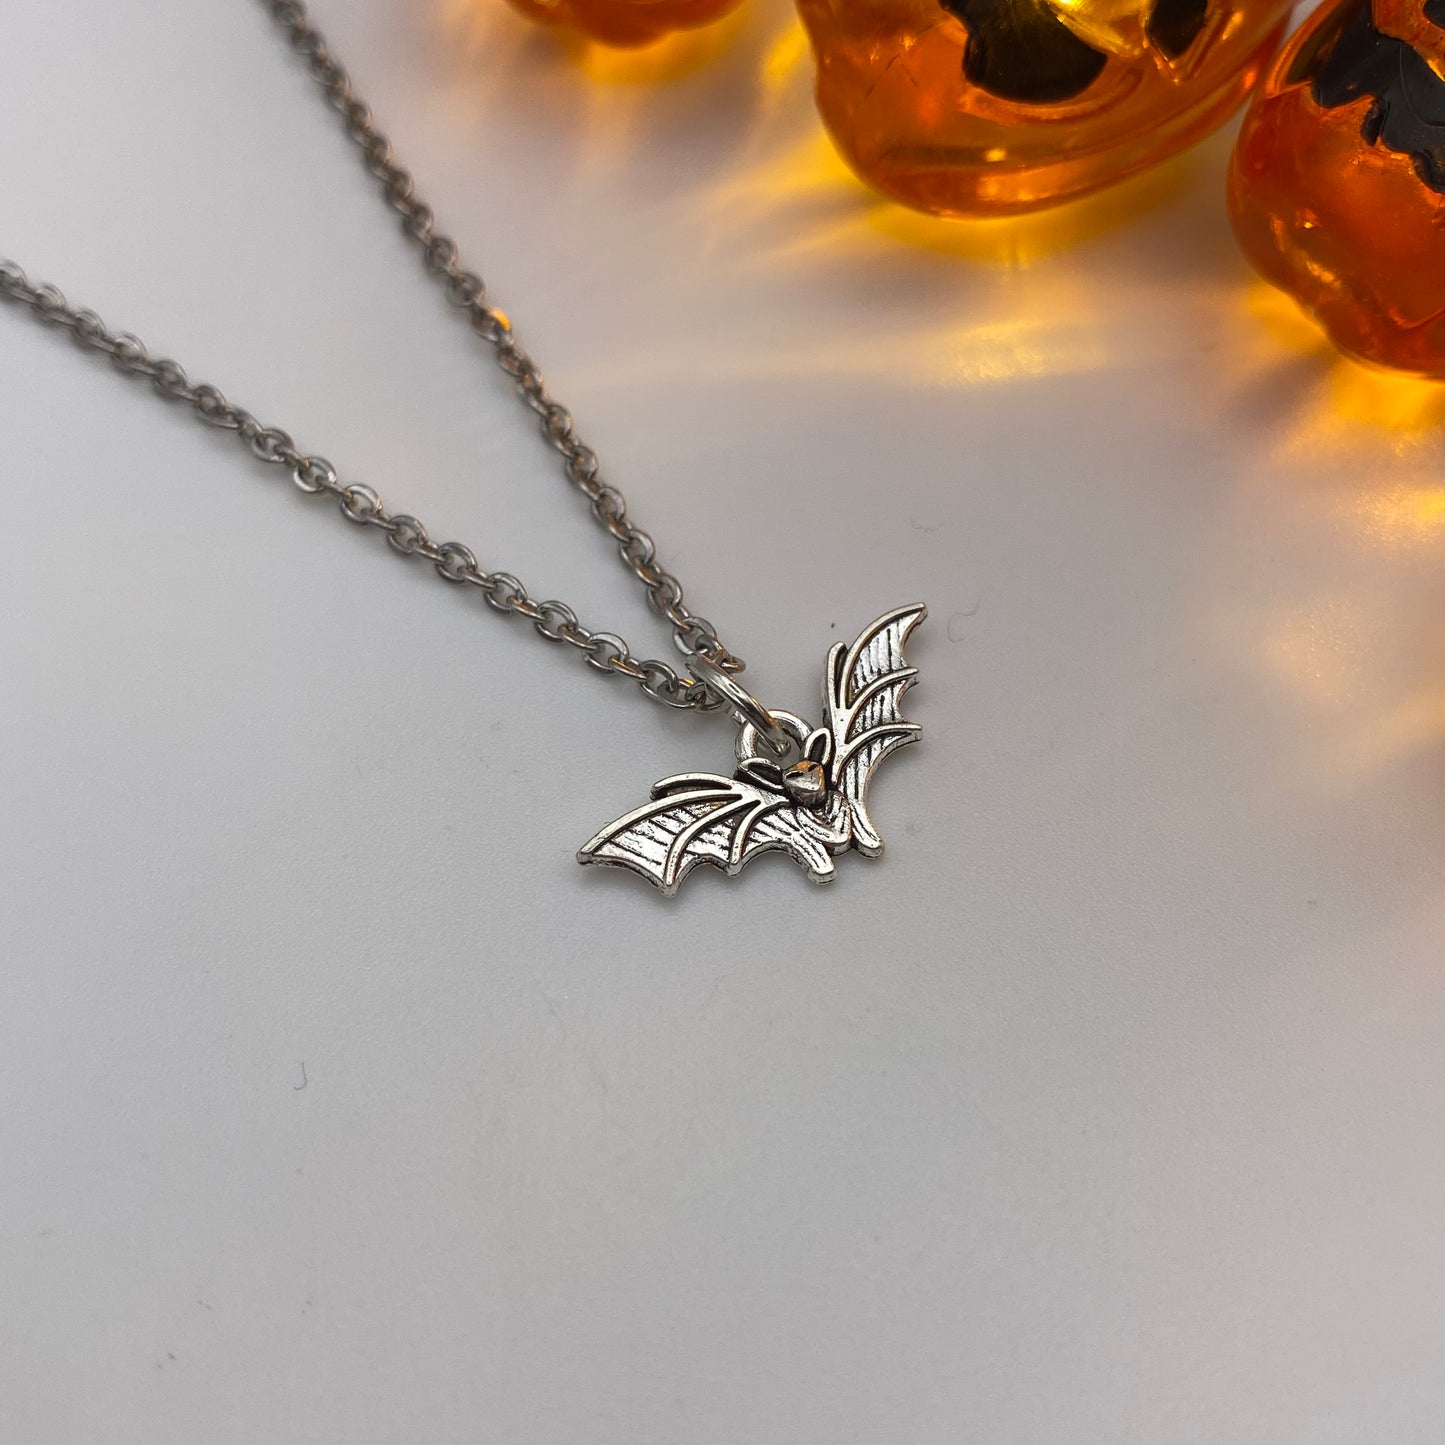 Small Bat Necklace